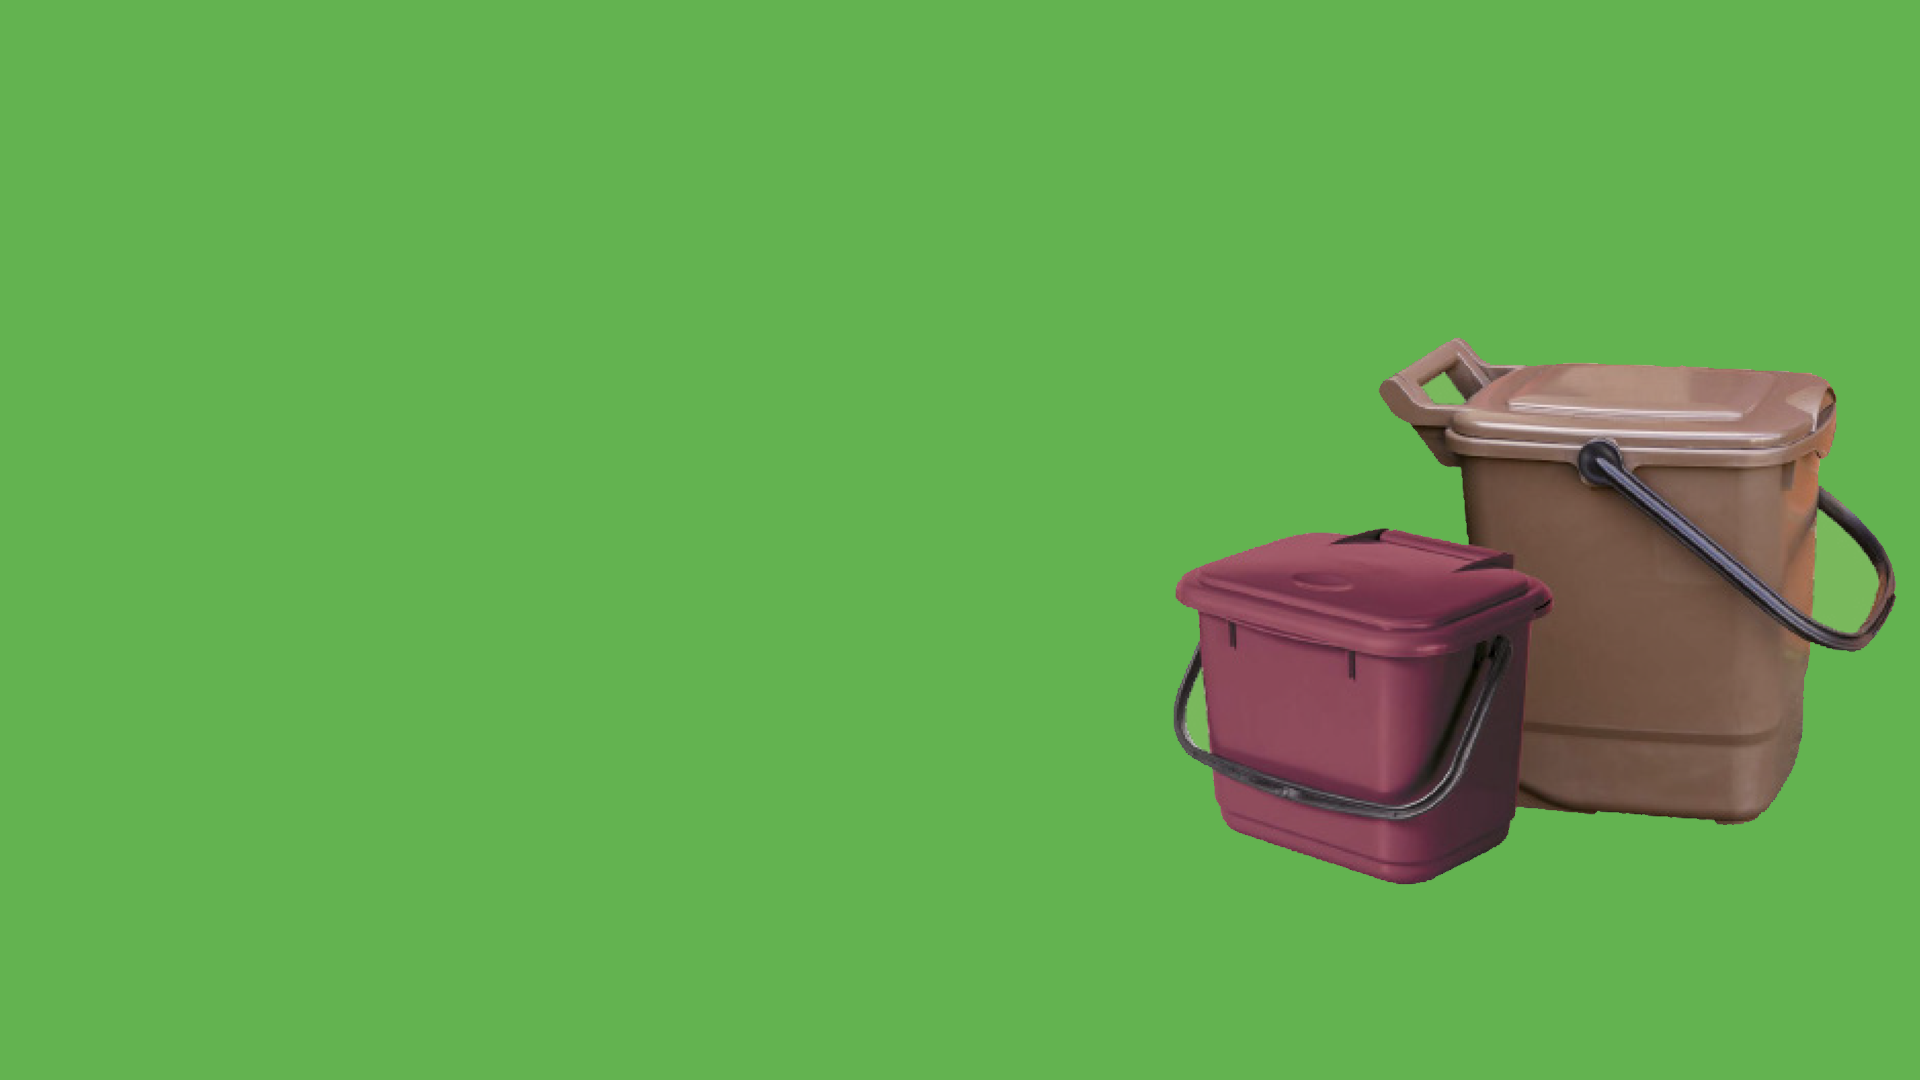 Green rectangle with the food waste caddies